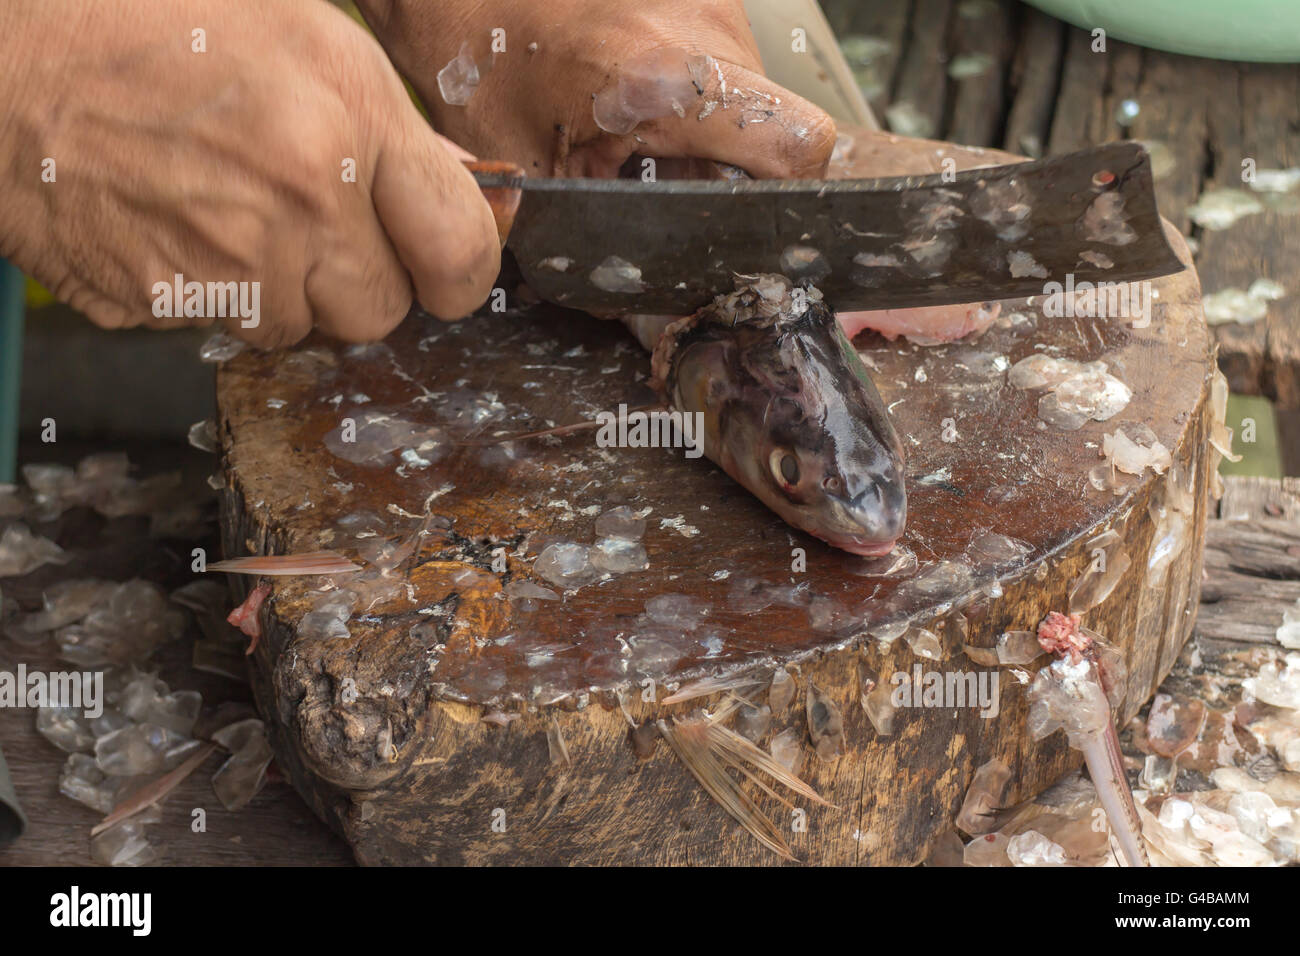 close-up of a worker cutting fish on a board Stock Photo